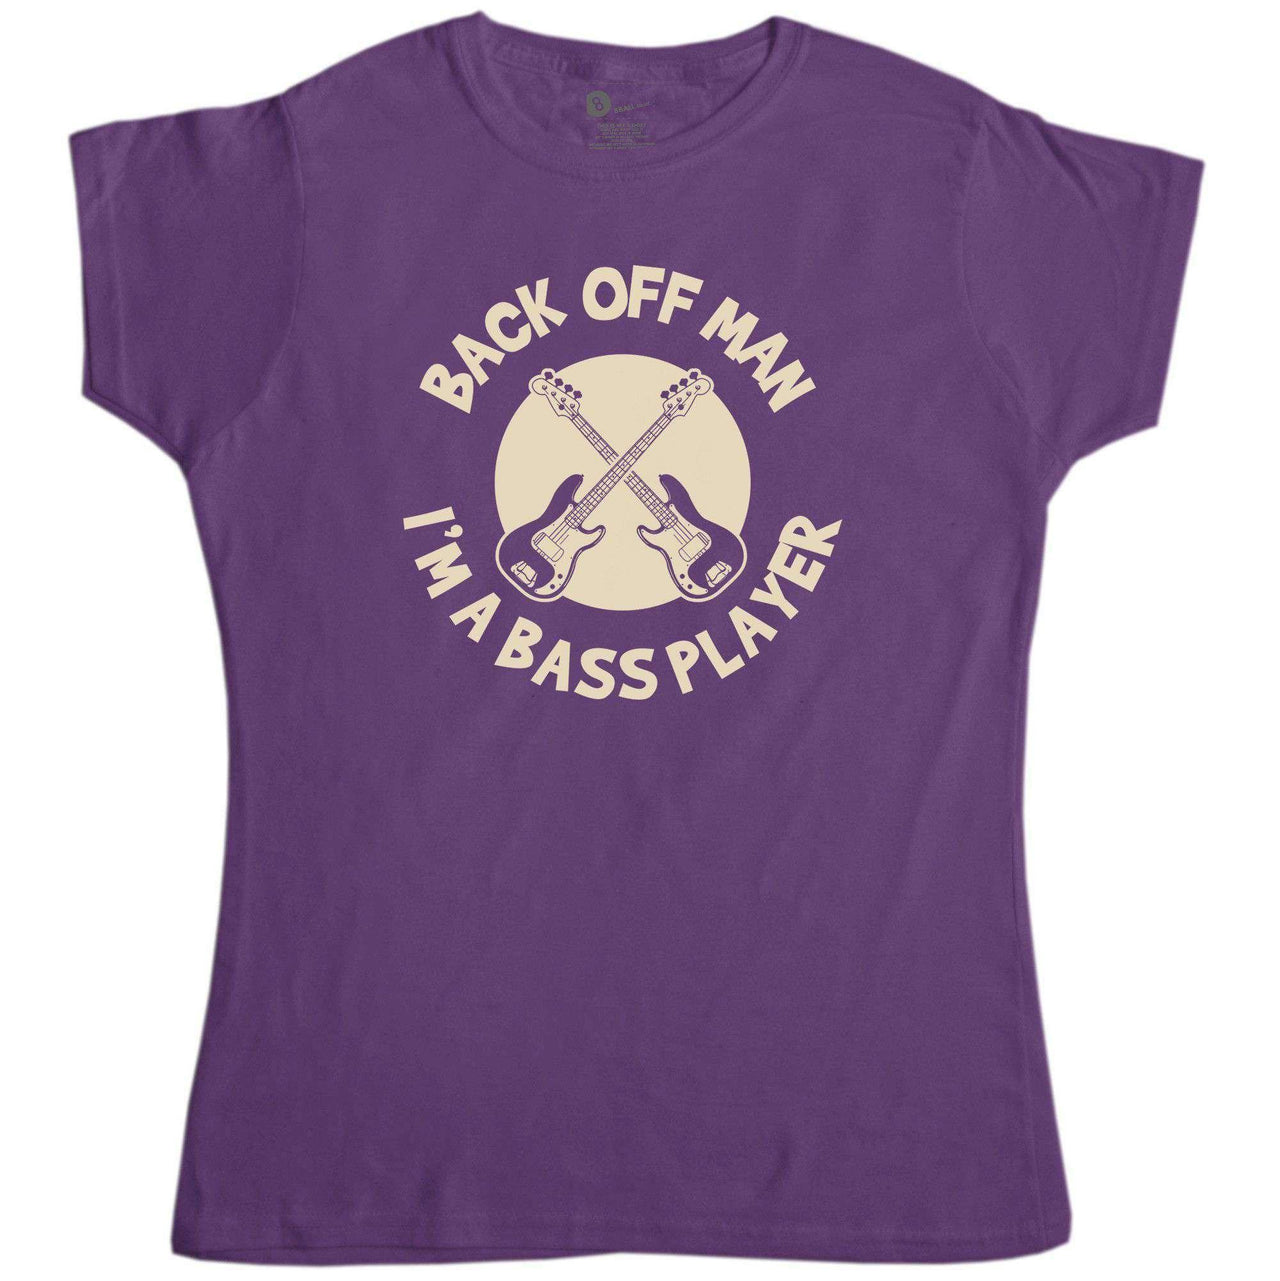 Back Off Man I'm A Bass Player Funny Fitted Womens T-Shirt 8Ball